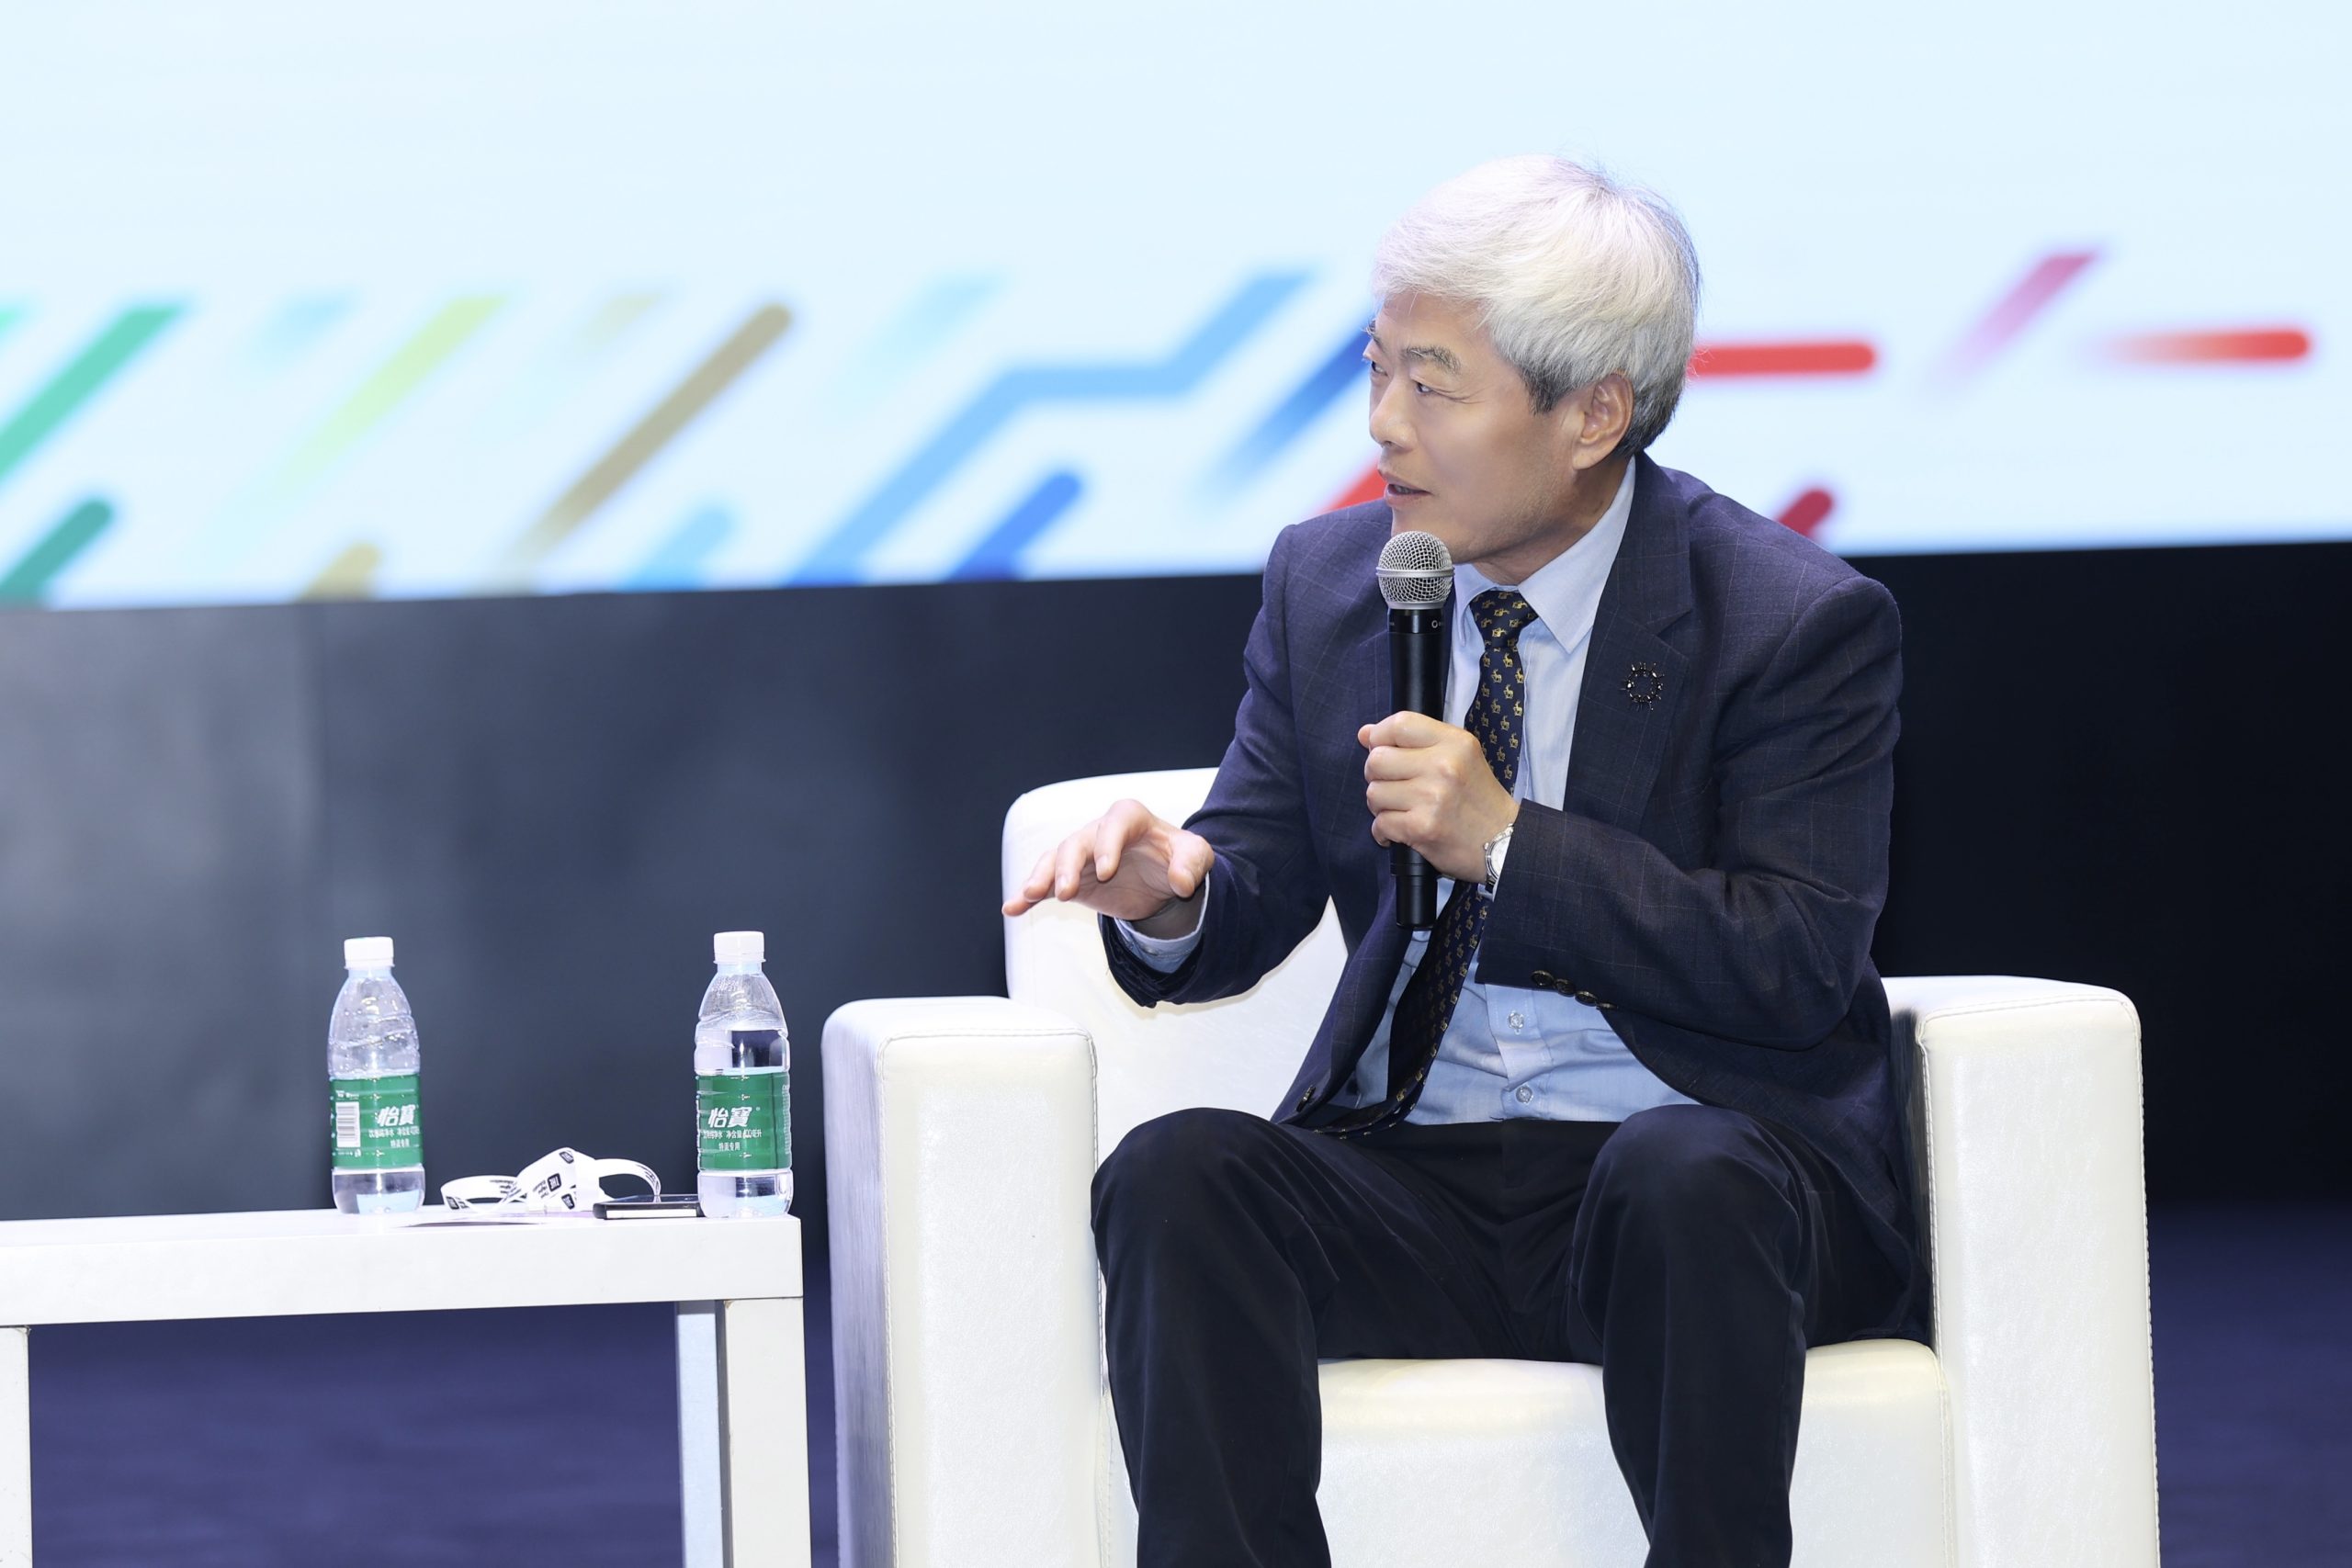 Professor Youmin Xi on what makes cities innovative